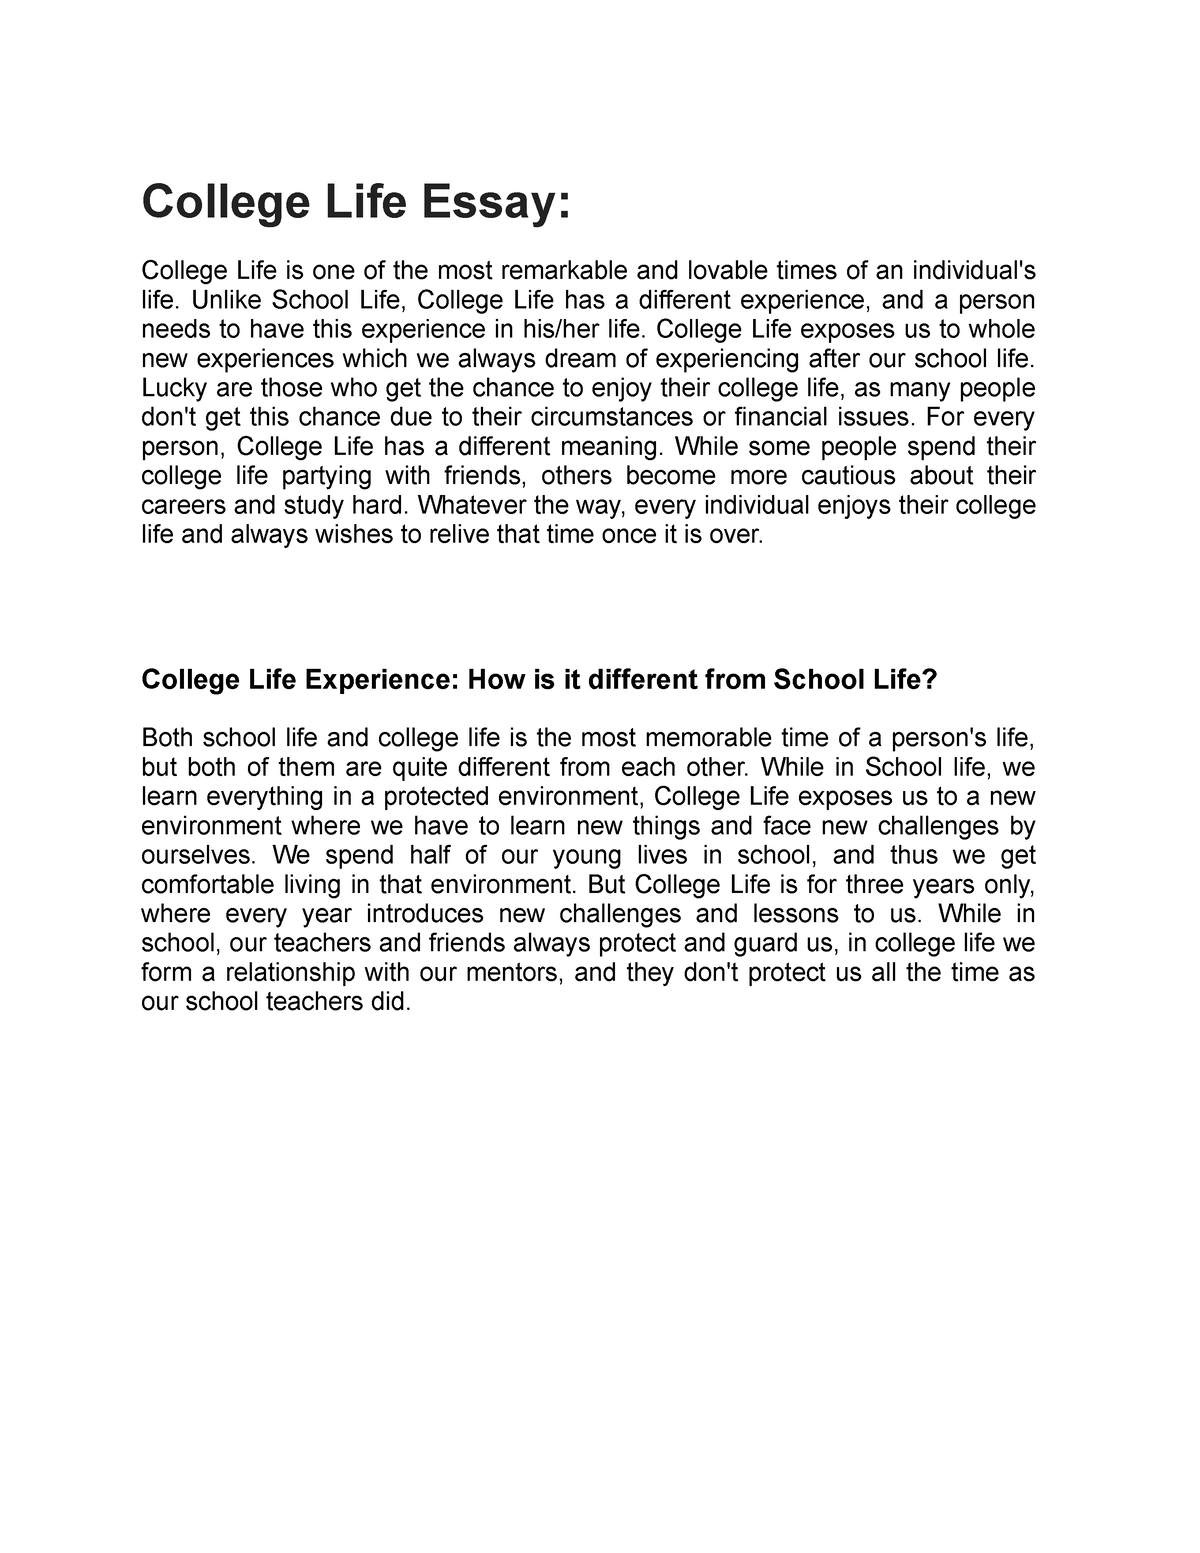 college life essay in simple words